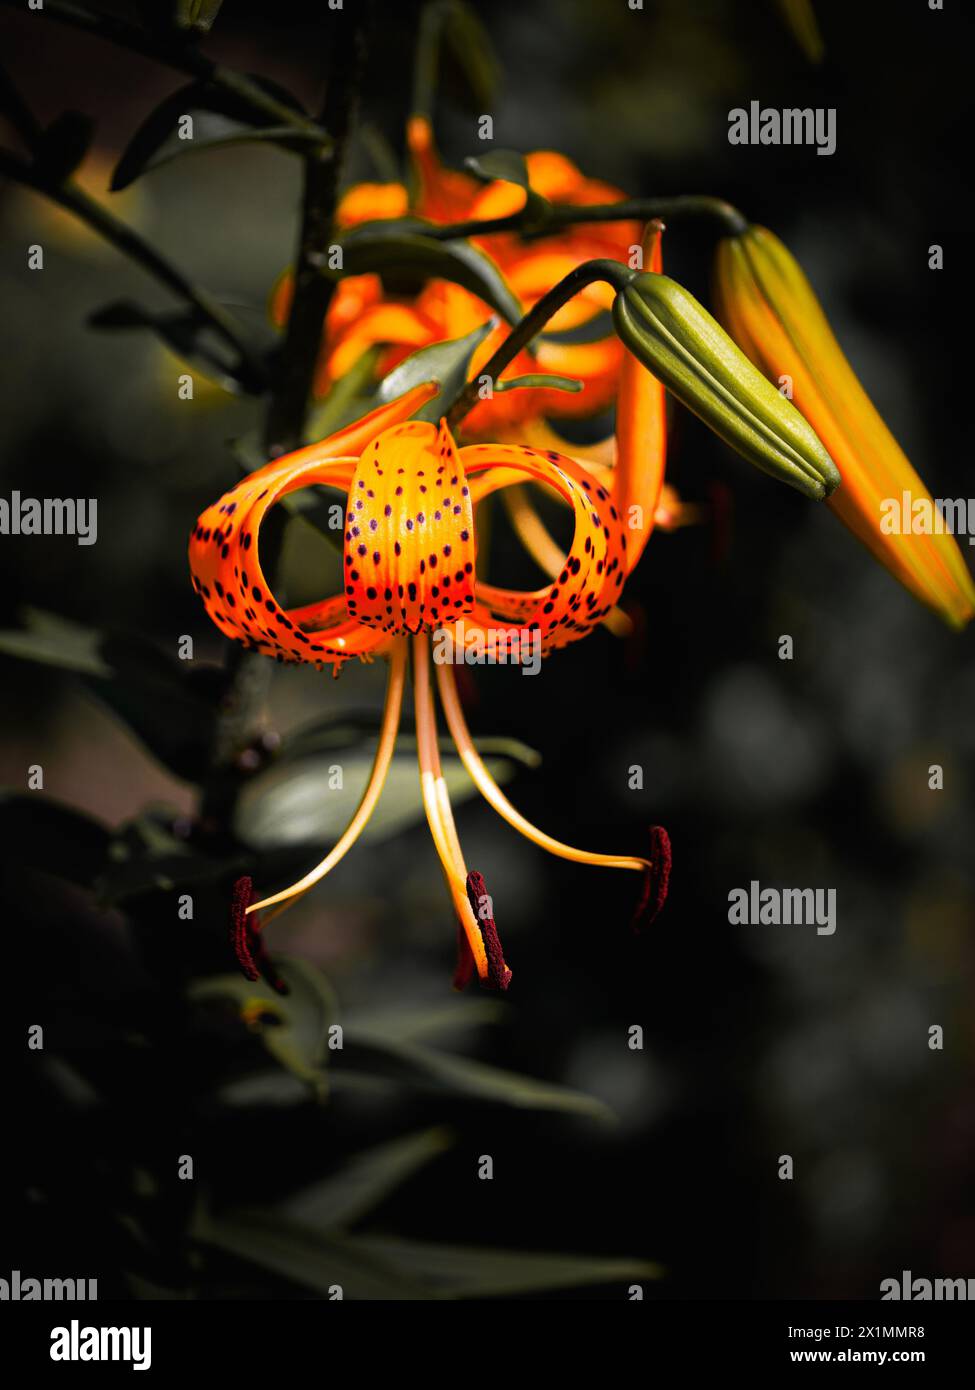 A vibrant orange tiger lily with spotted petals is in full bloom, surrounded by dark foliage; the mood is lively and fresh. This image can be used for Stock Photo